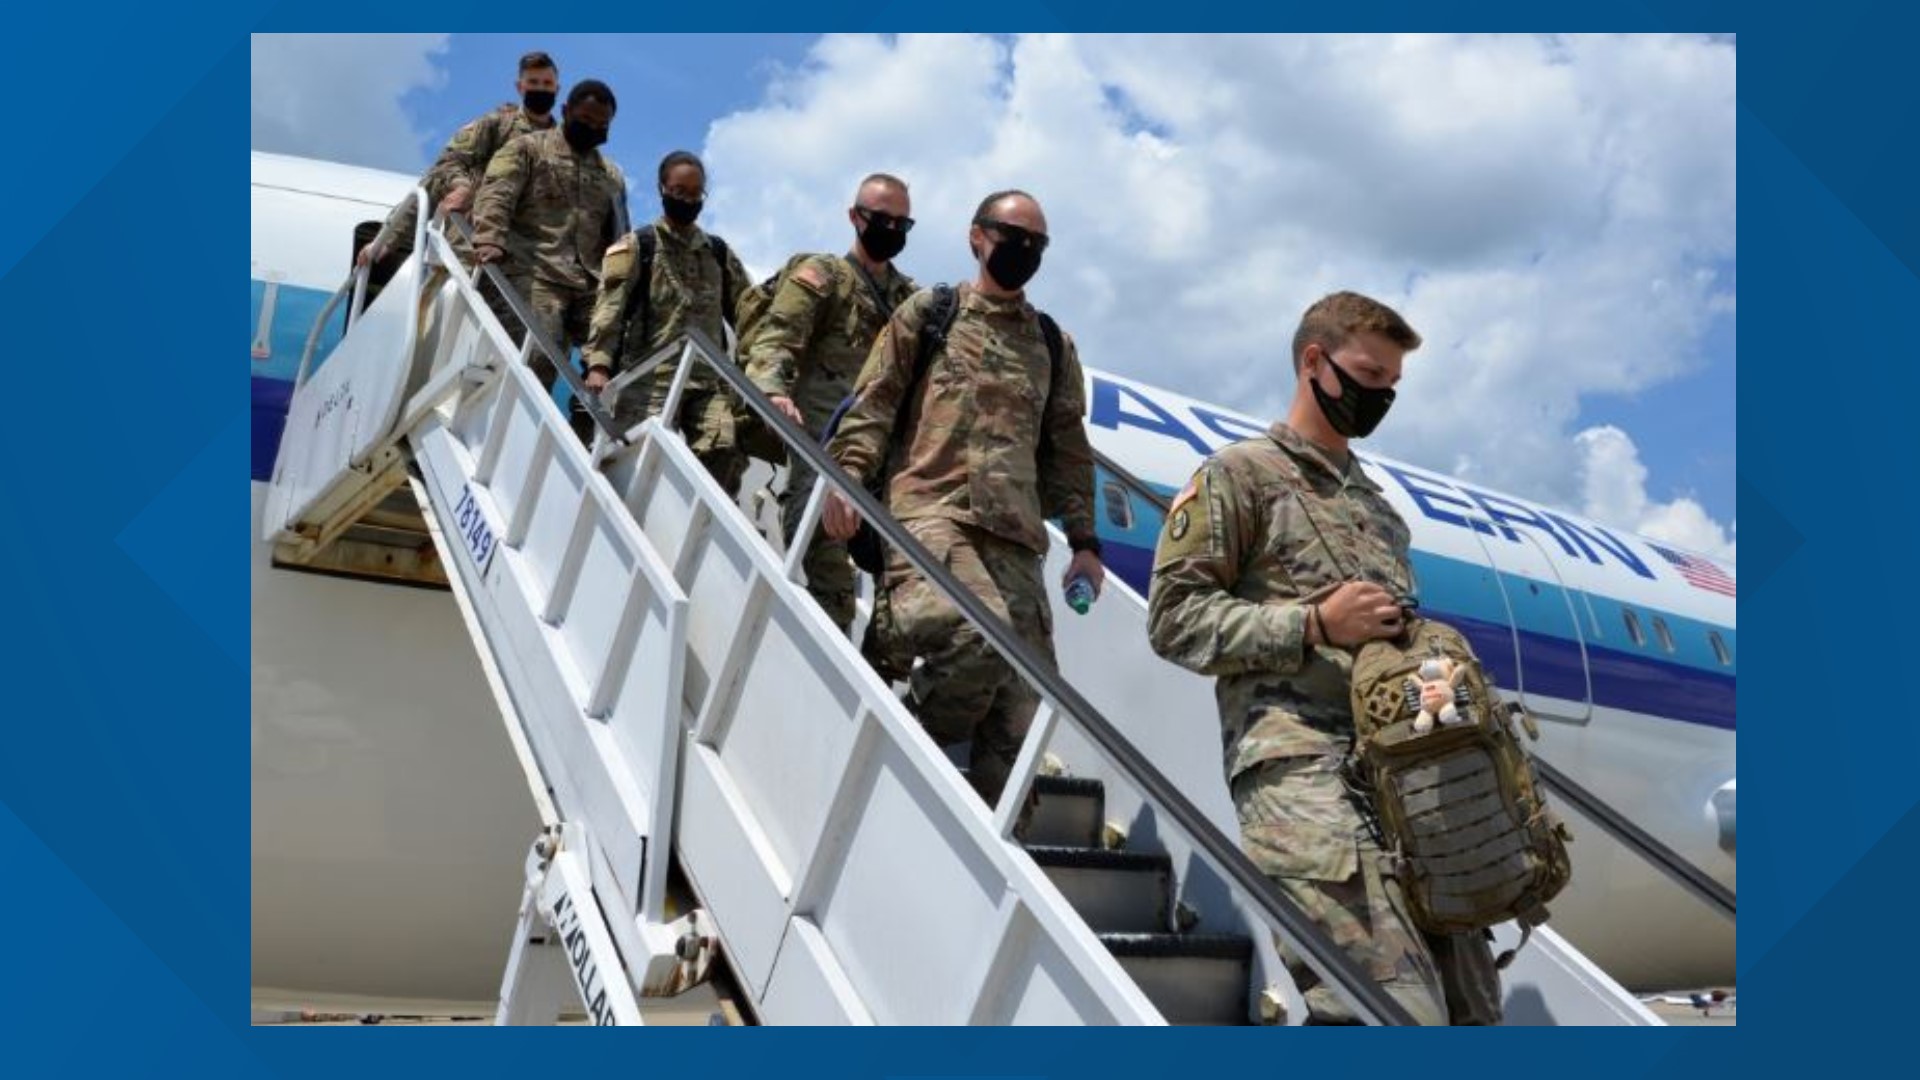 More than 120 North Carolina National Guard soldiers return home after year-long deployment in Middle East.